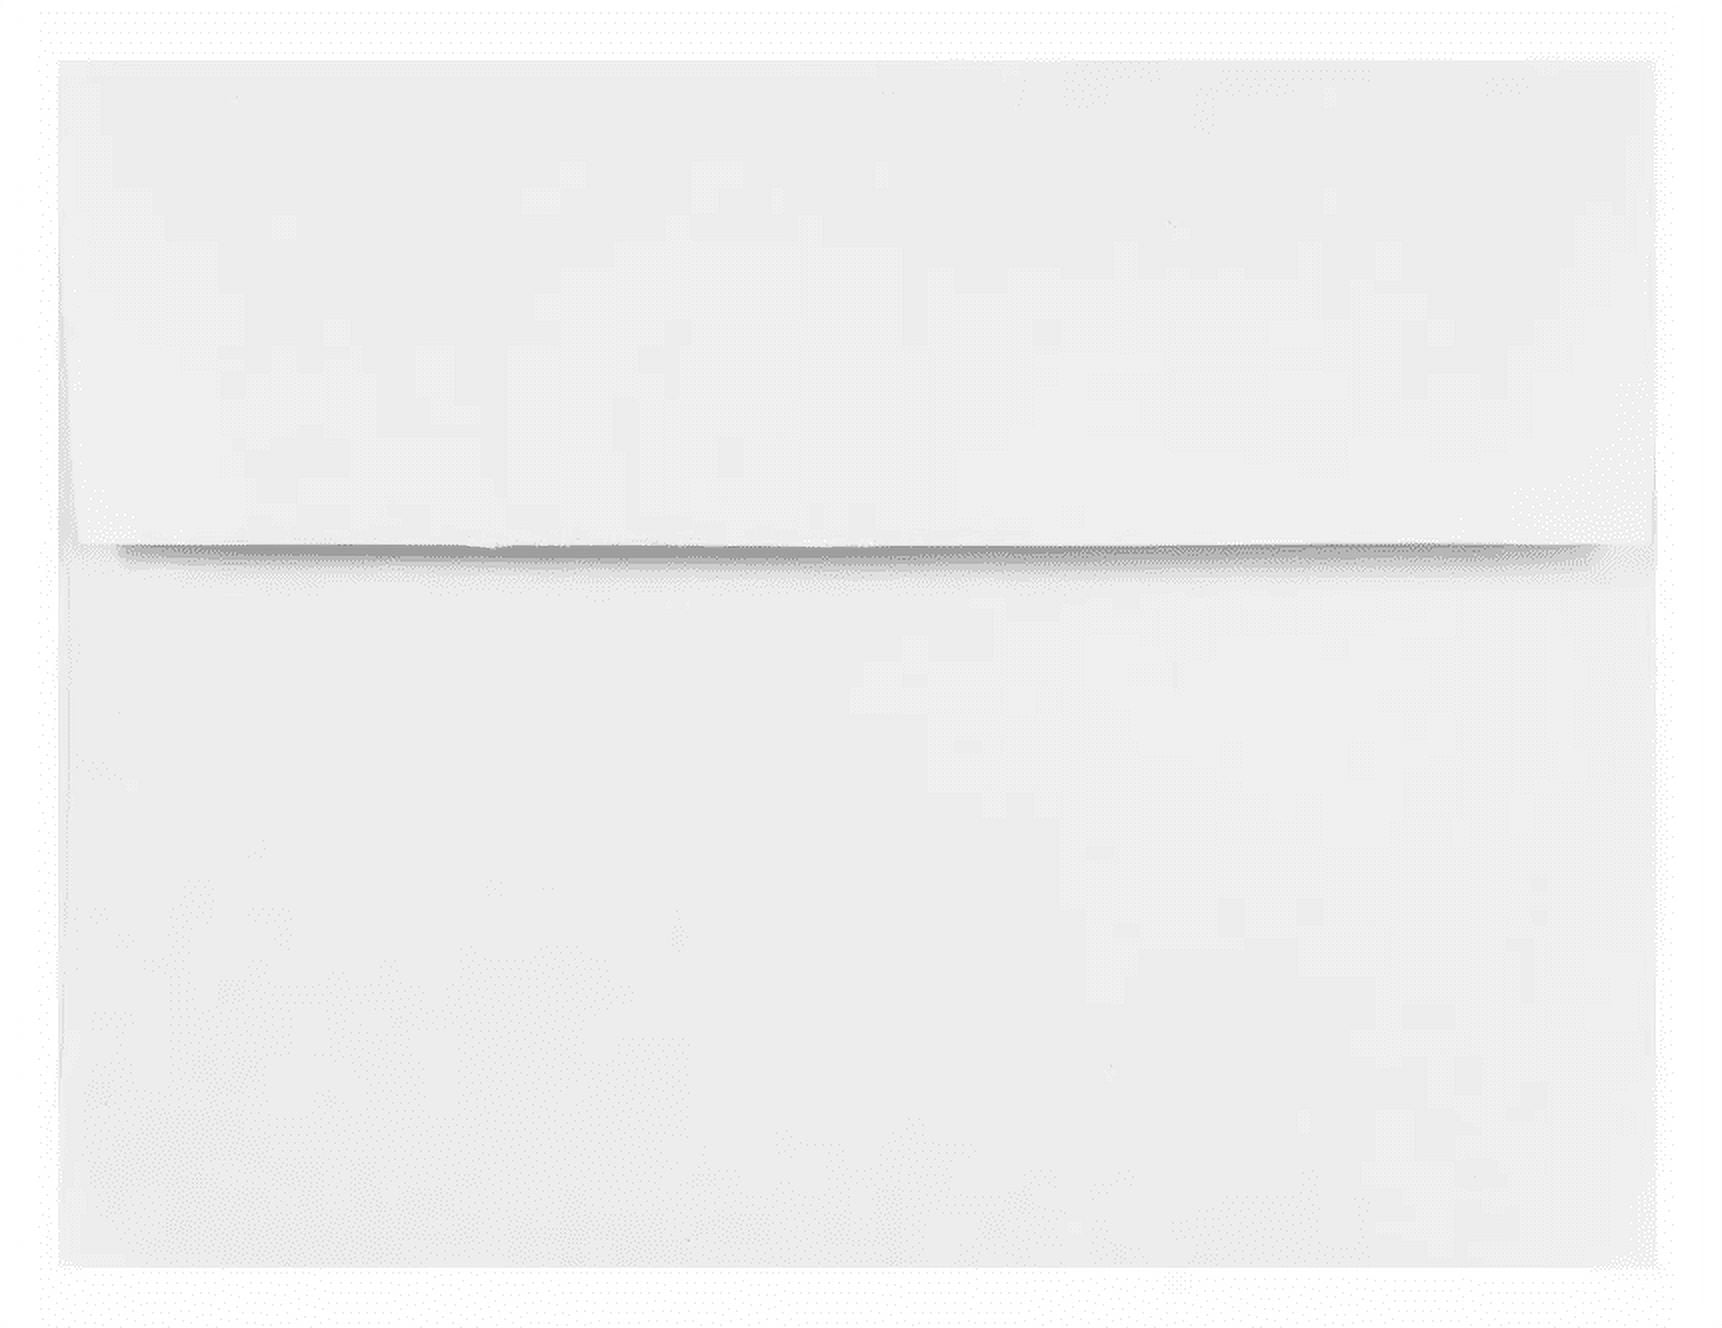 Best Deal for PONATIA 50 Pack A4 Envelopes, 4 1/4 x 6 1/8 Inches Emerald